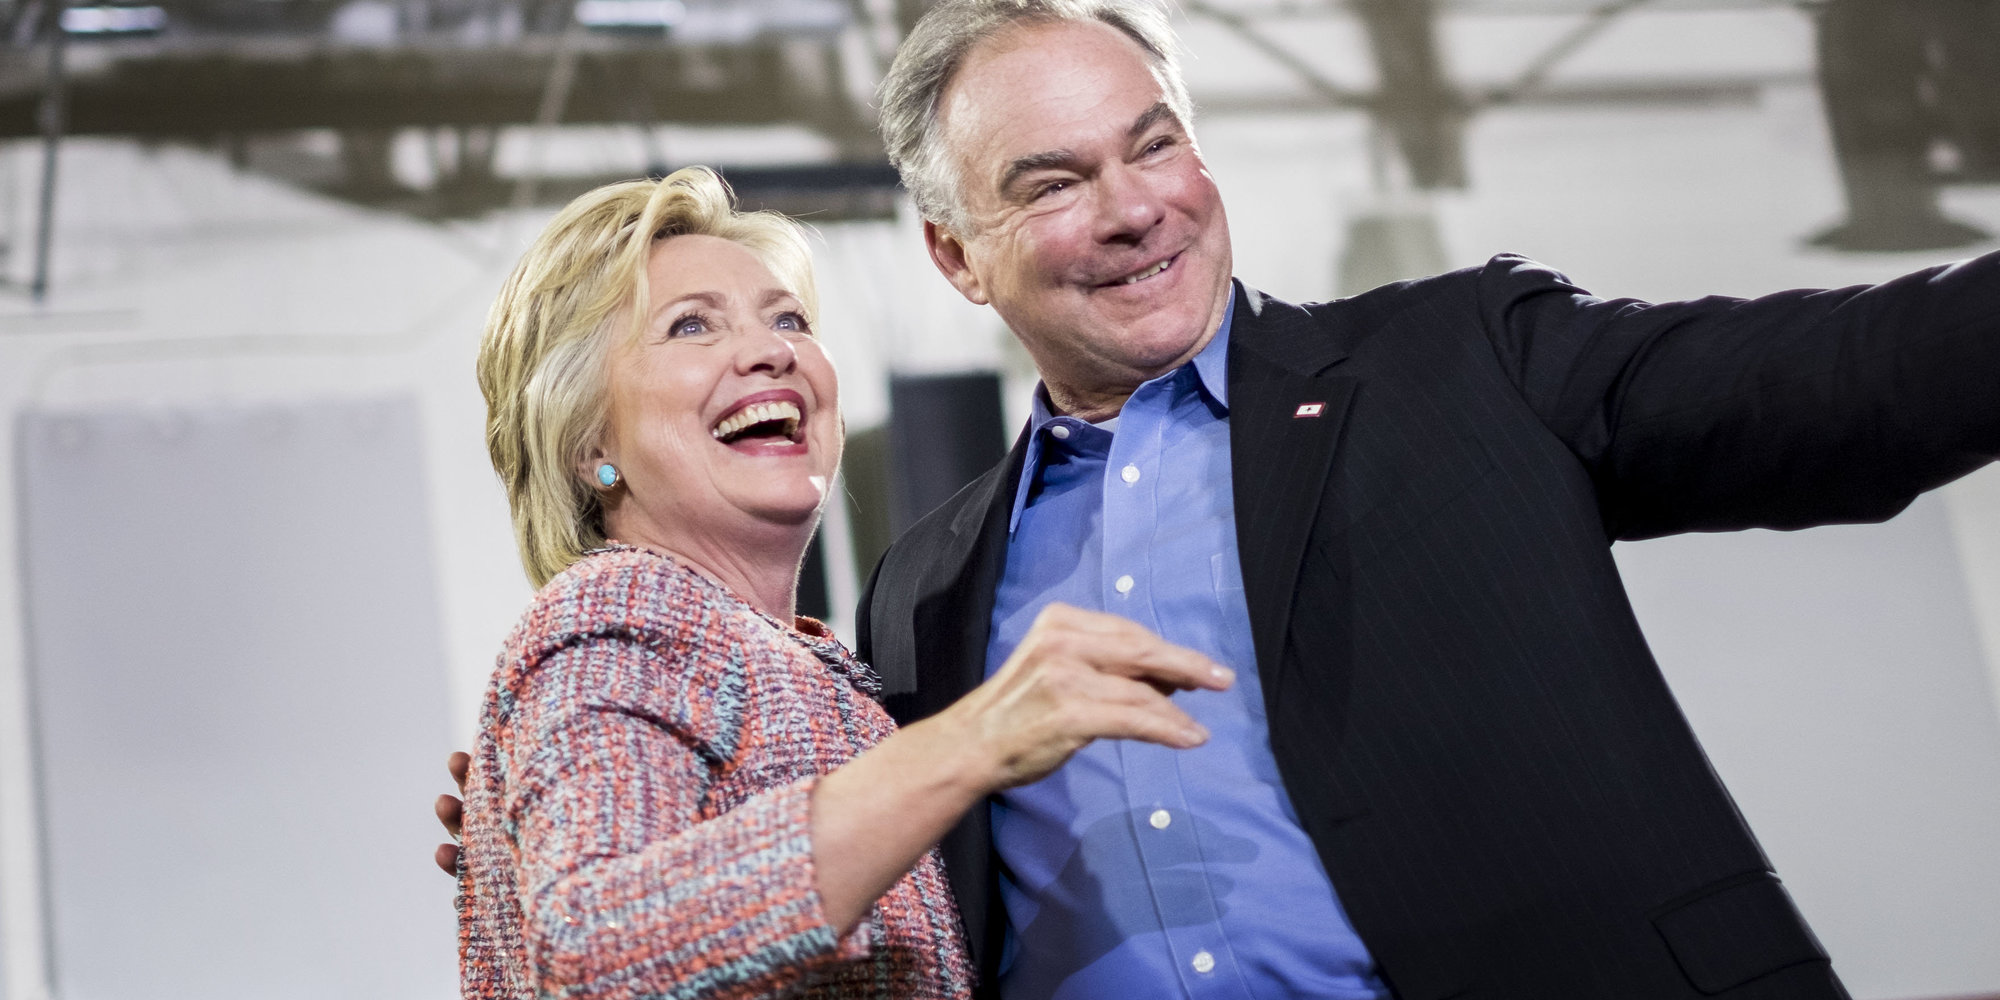 Tim Kaine Calls To Deregulate Banks As He Campaigns To Be Clinton's VP